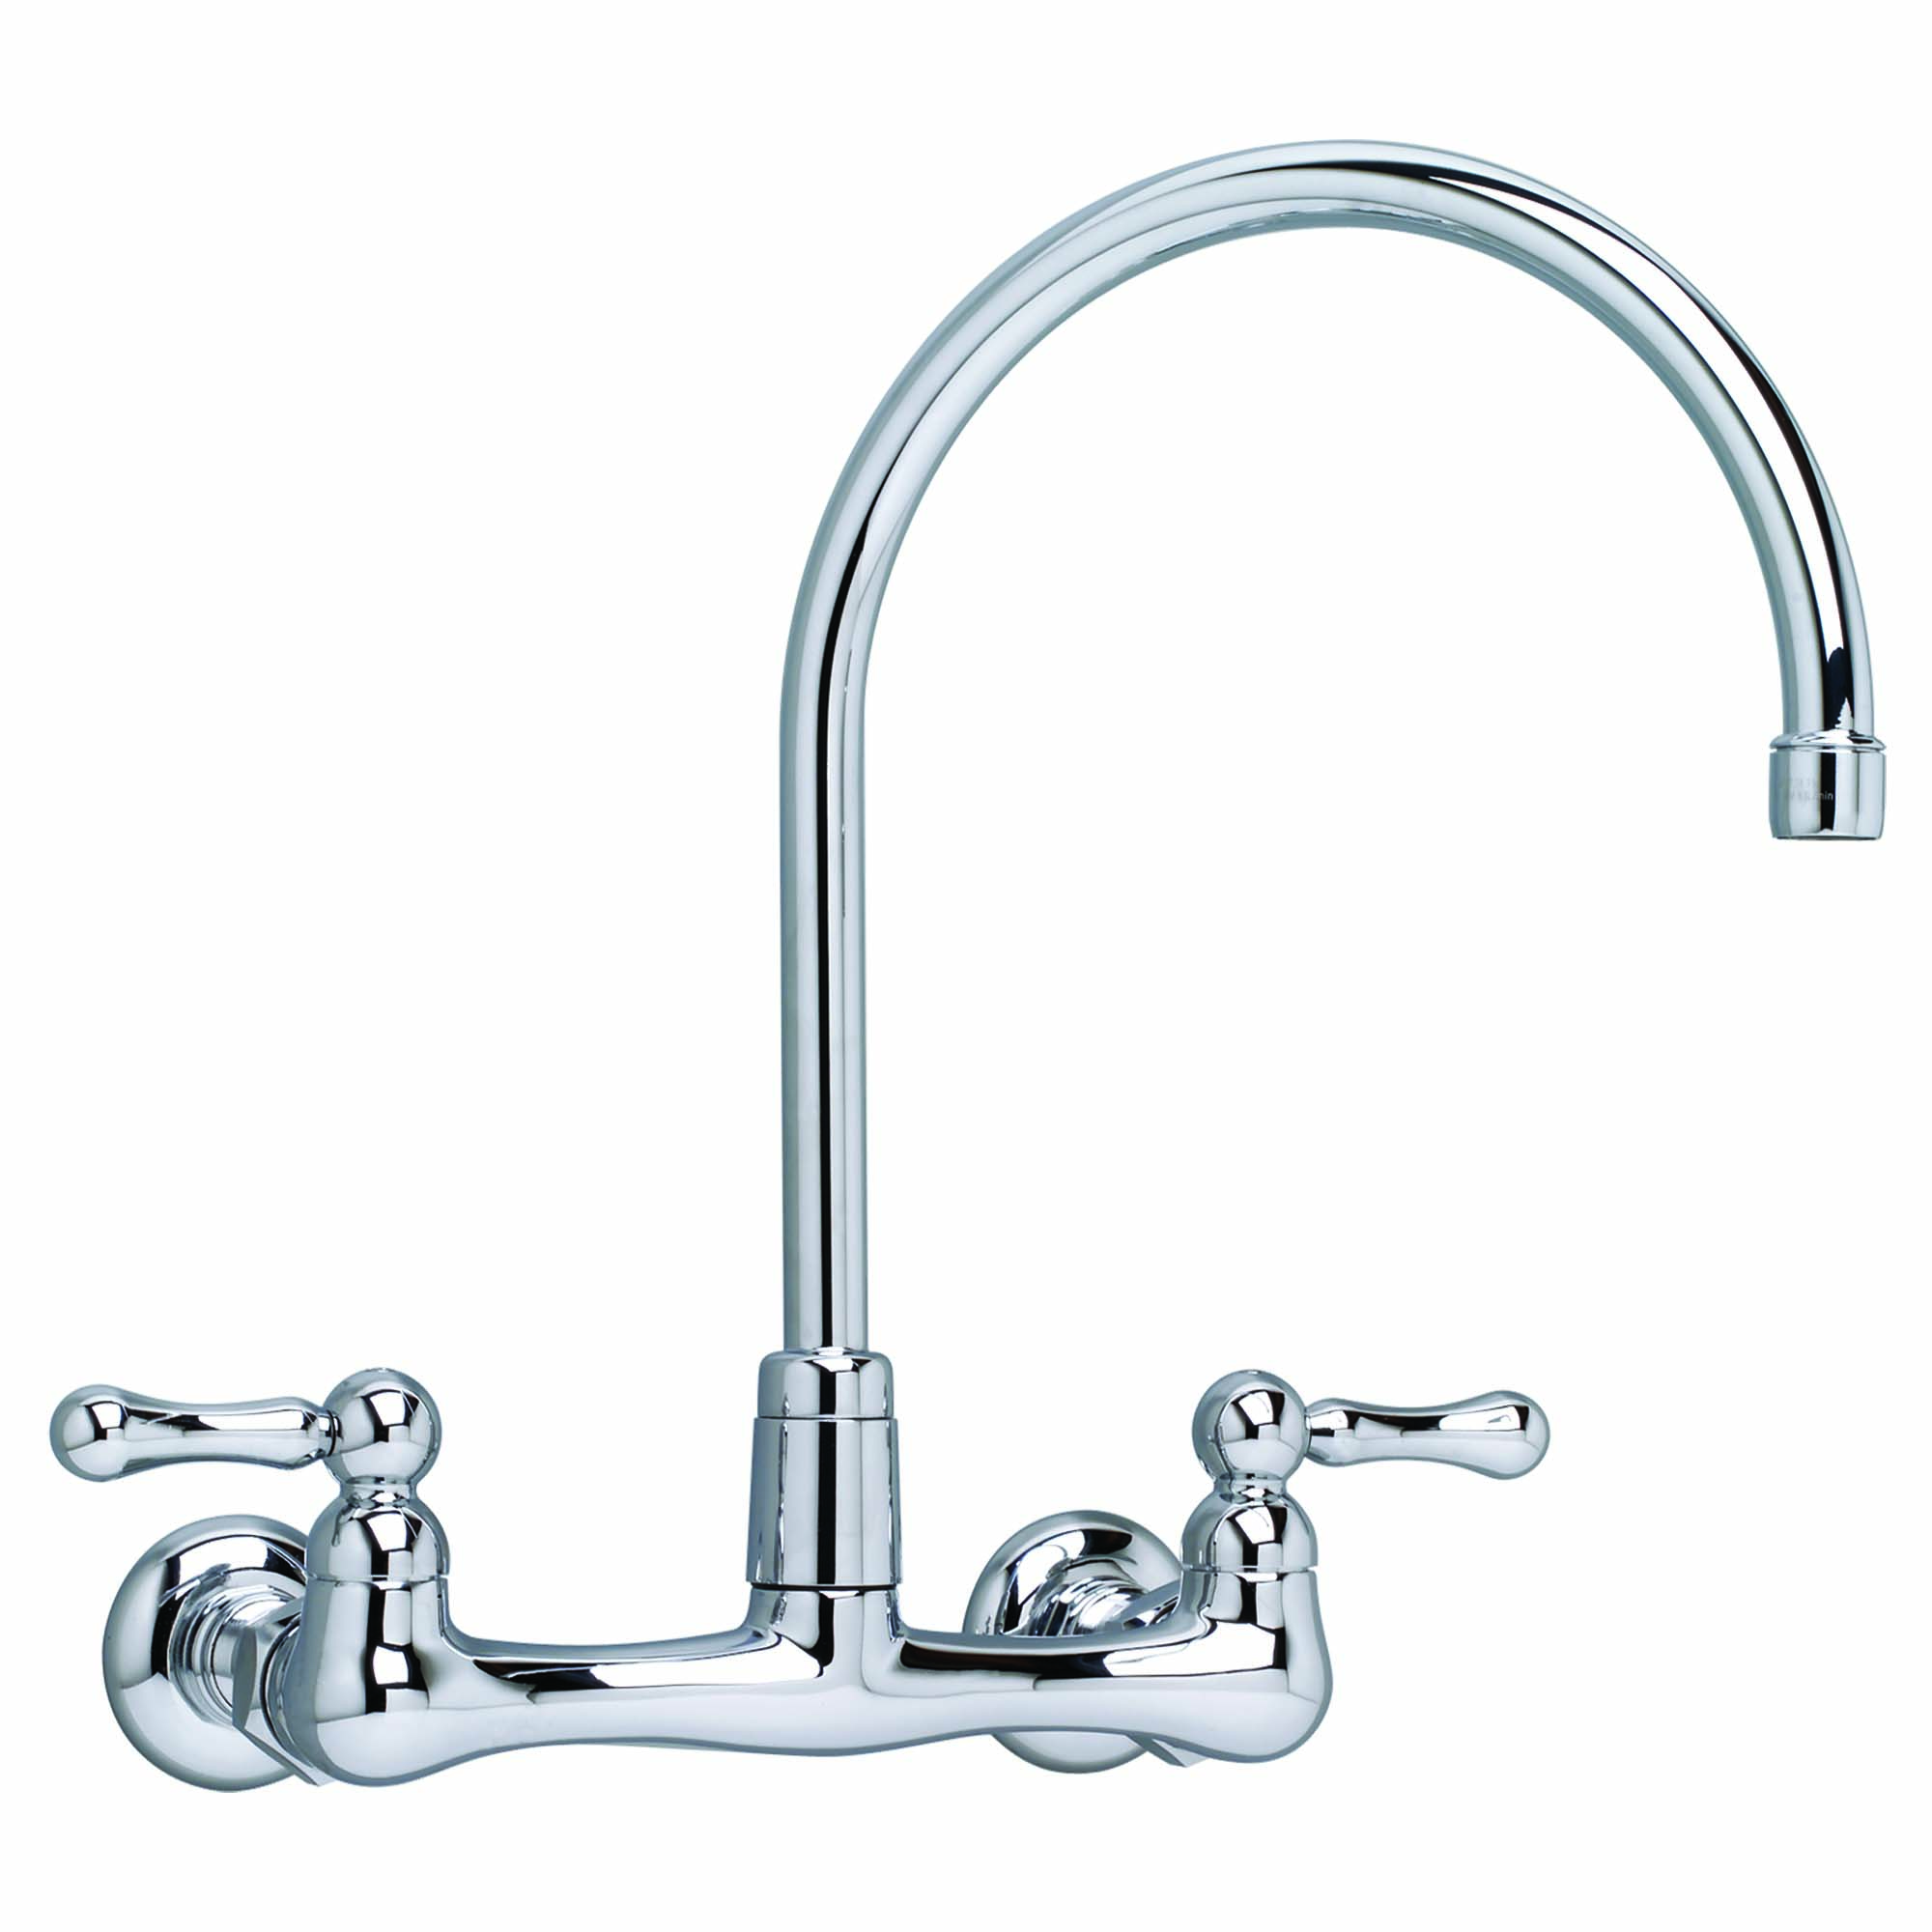 Heritage Wall Mount Faucet With Gooseneck Spout and Lever Handles CHROME